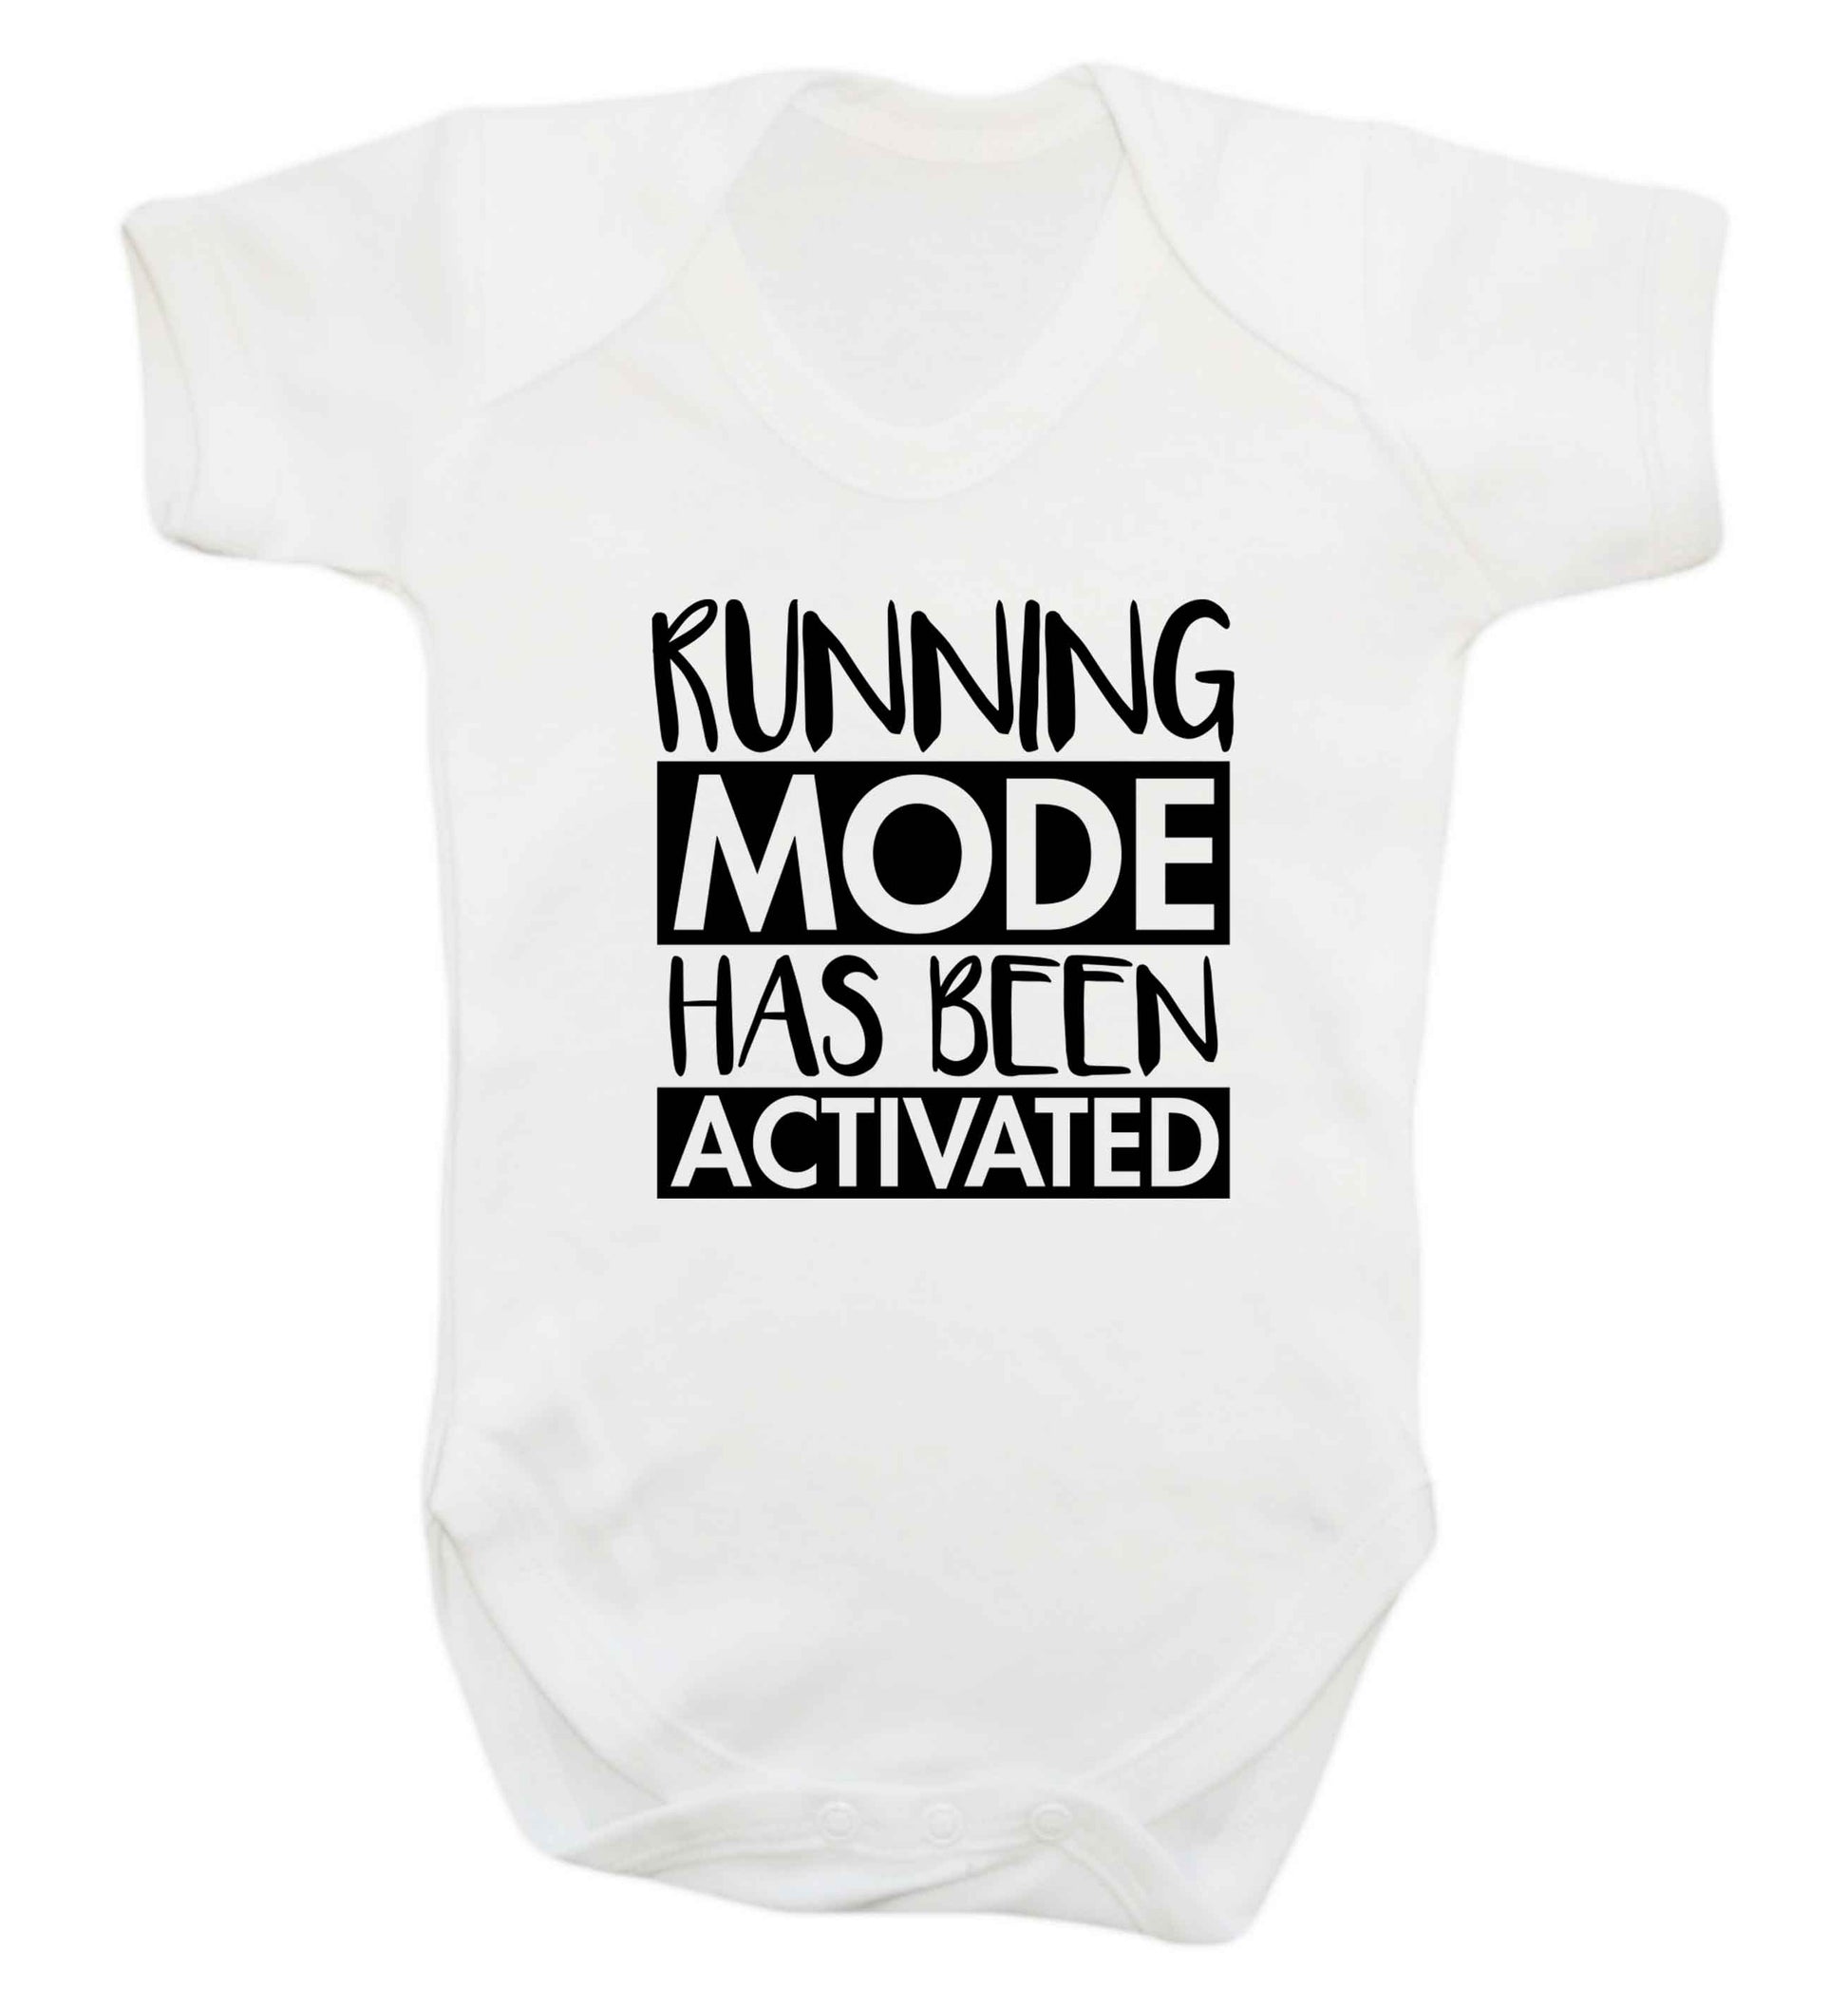 Running mode has been activated baby vest white 18-24 months